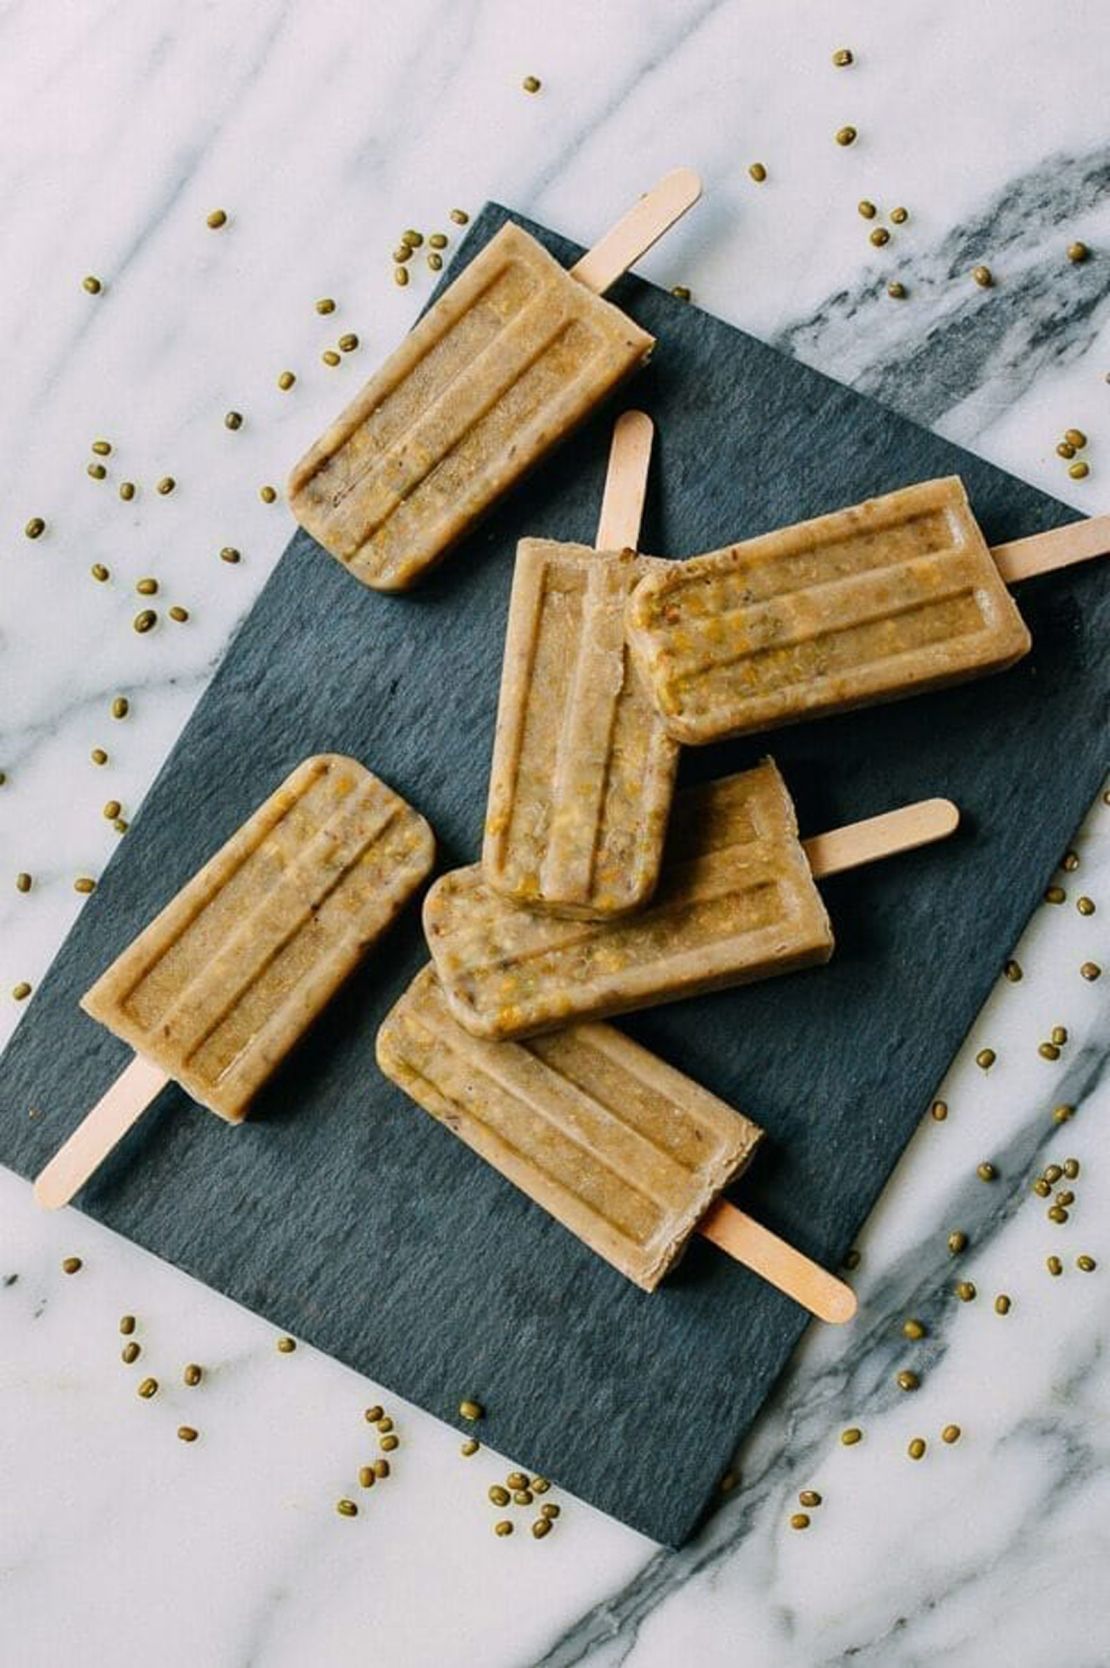 The Woks of Life's mung bean popsicles, which matriarch Judy Leung developed.